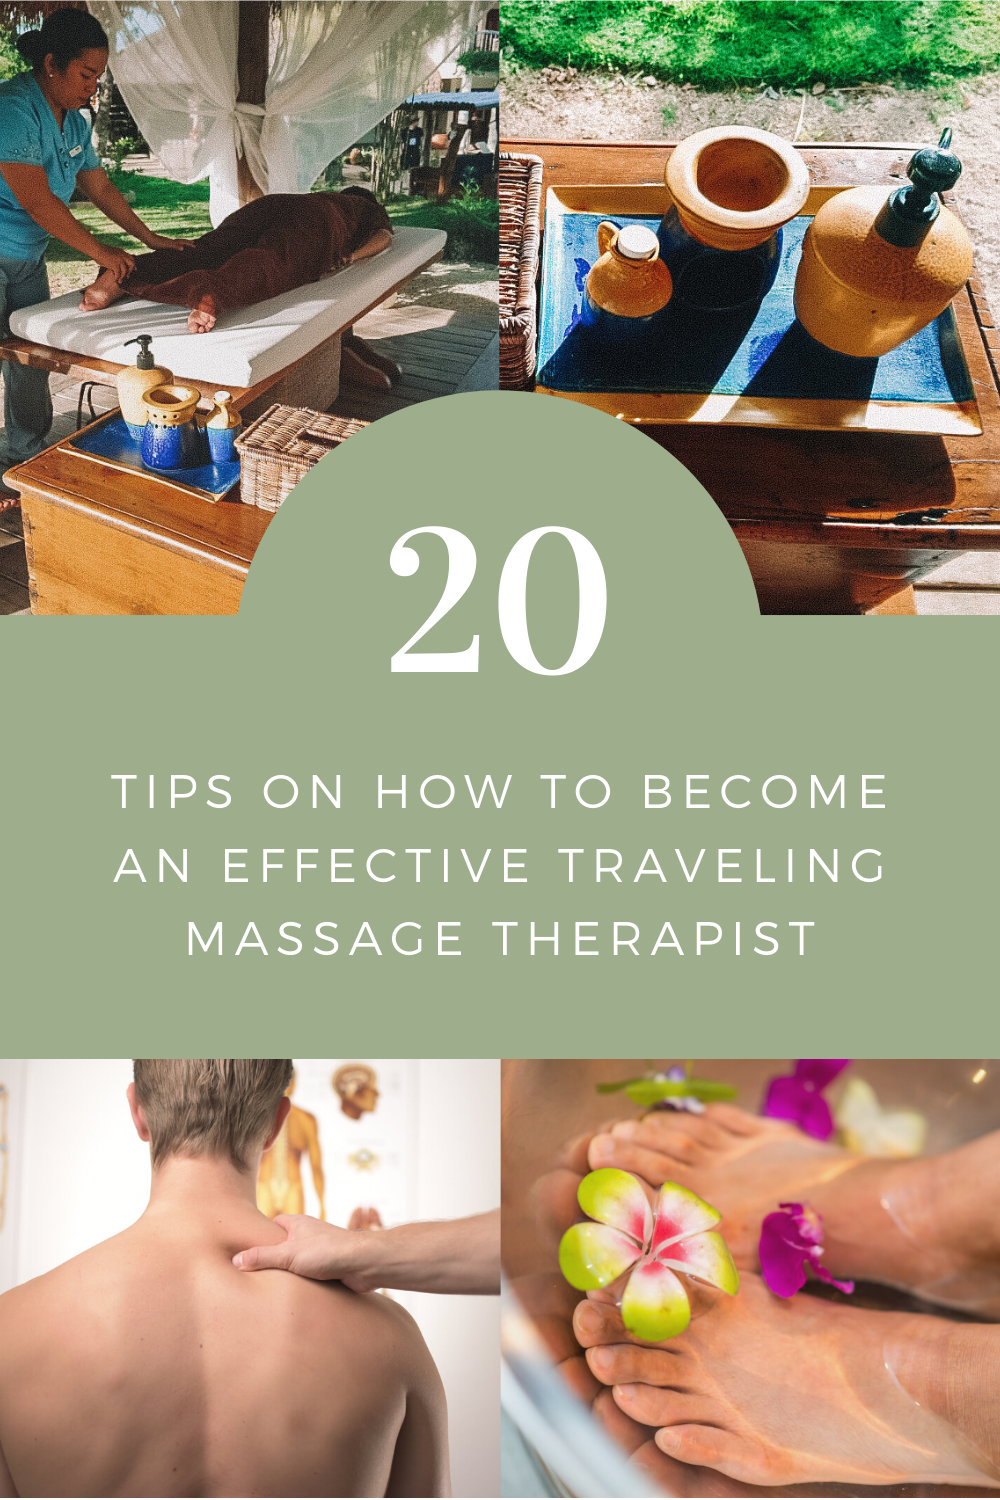 20 Tips on How To Become an Effective Traveling Massage Therapist1.png